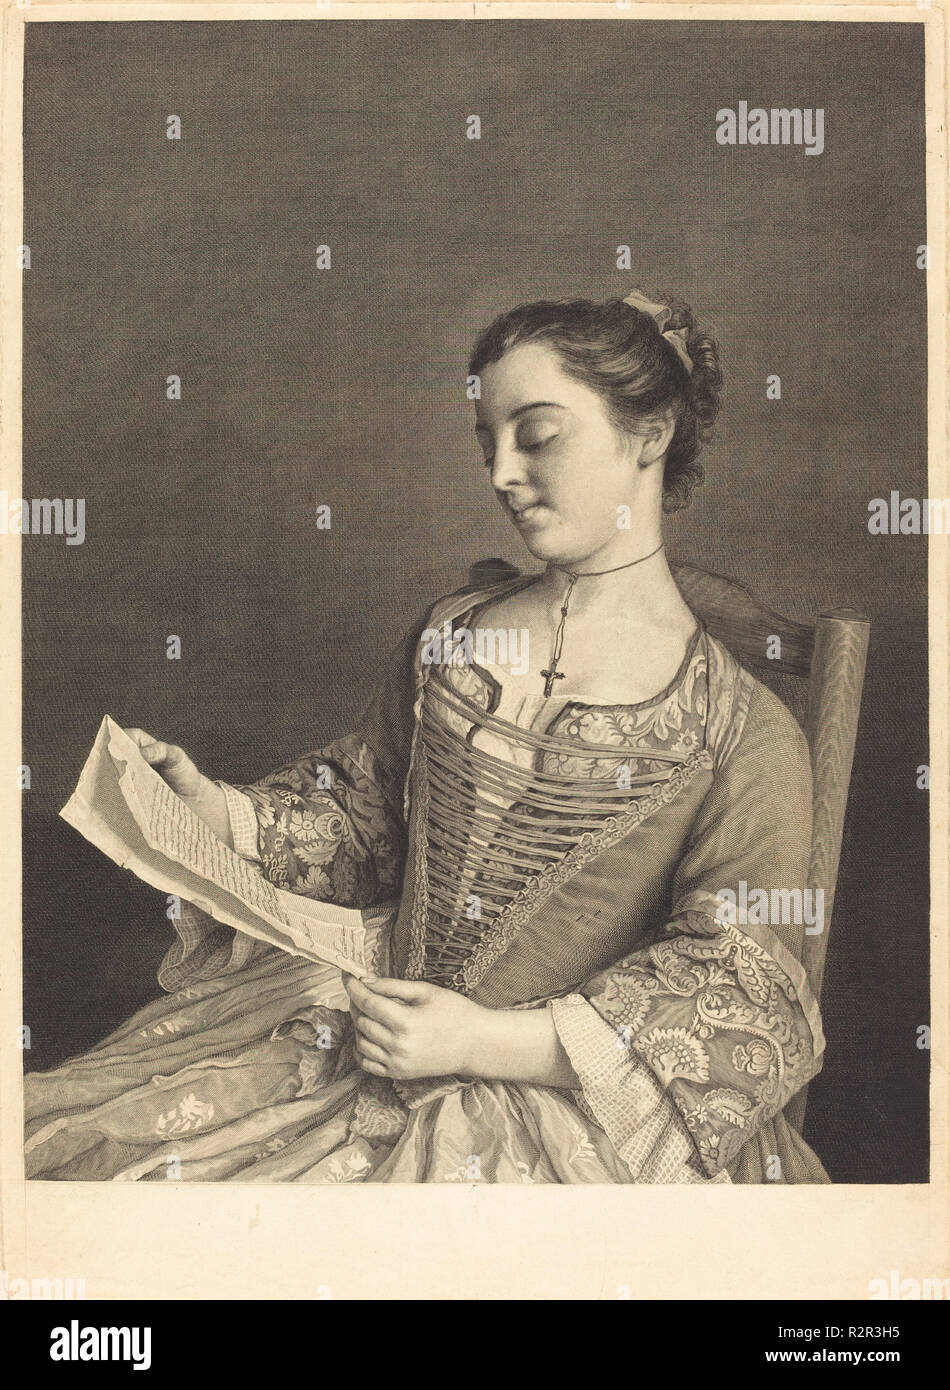 Mlle. Lavergne. Medium: engraving and etching. Museum: National Gallery of Art, Washington DC. Author: Jean Daullé and Simon Francois Ravenet I after Jean-Étienne Liotard. Stock Photo